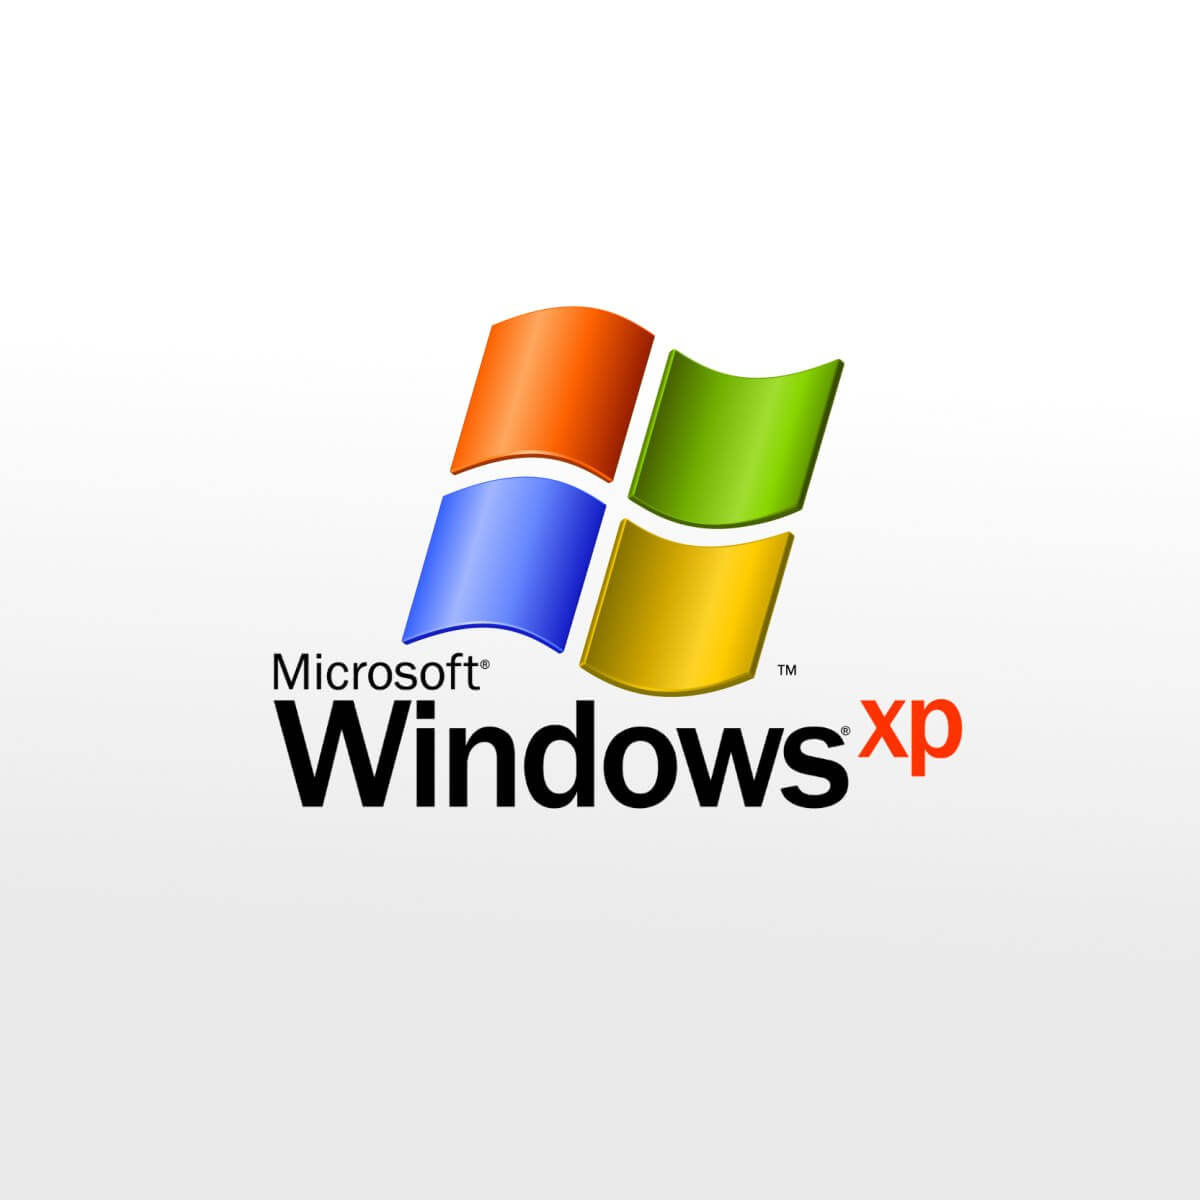 Windows XP needs to be activated before logging in